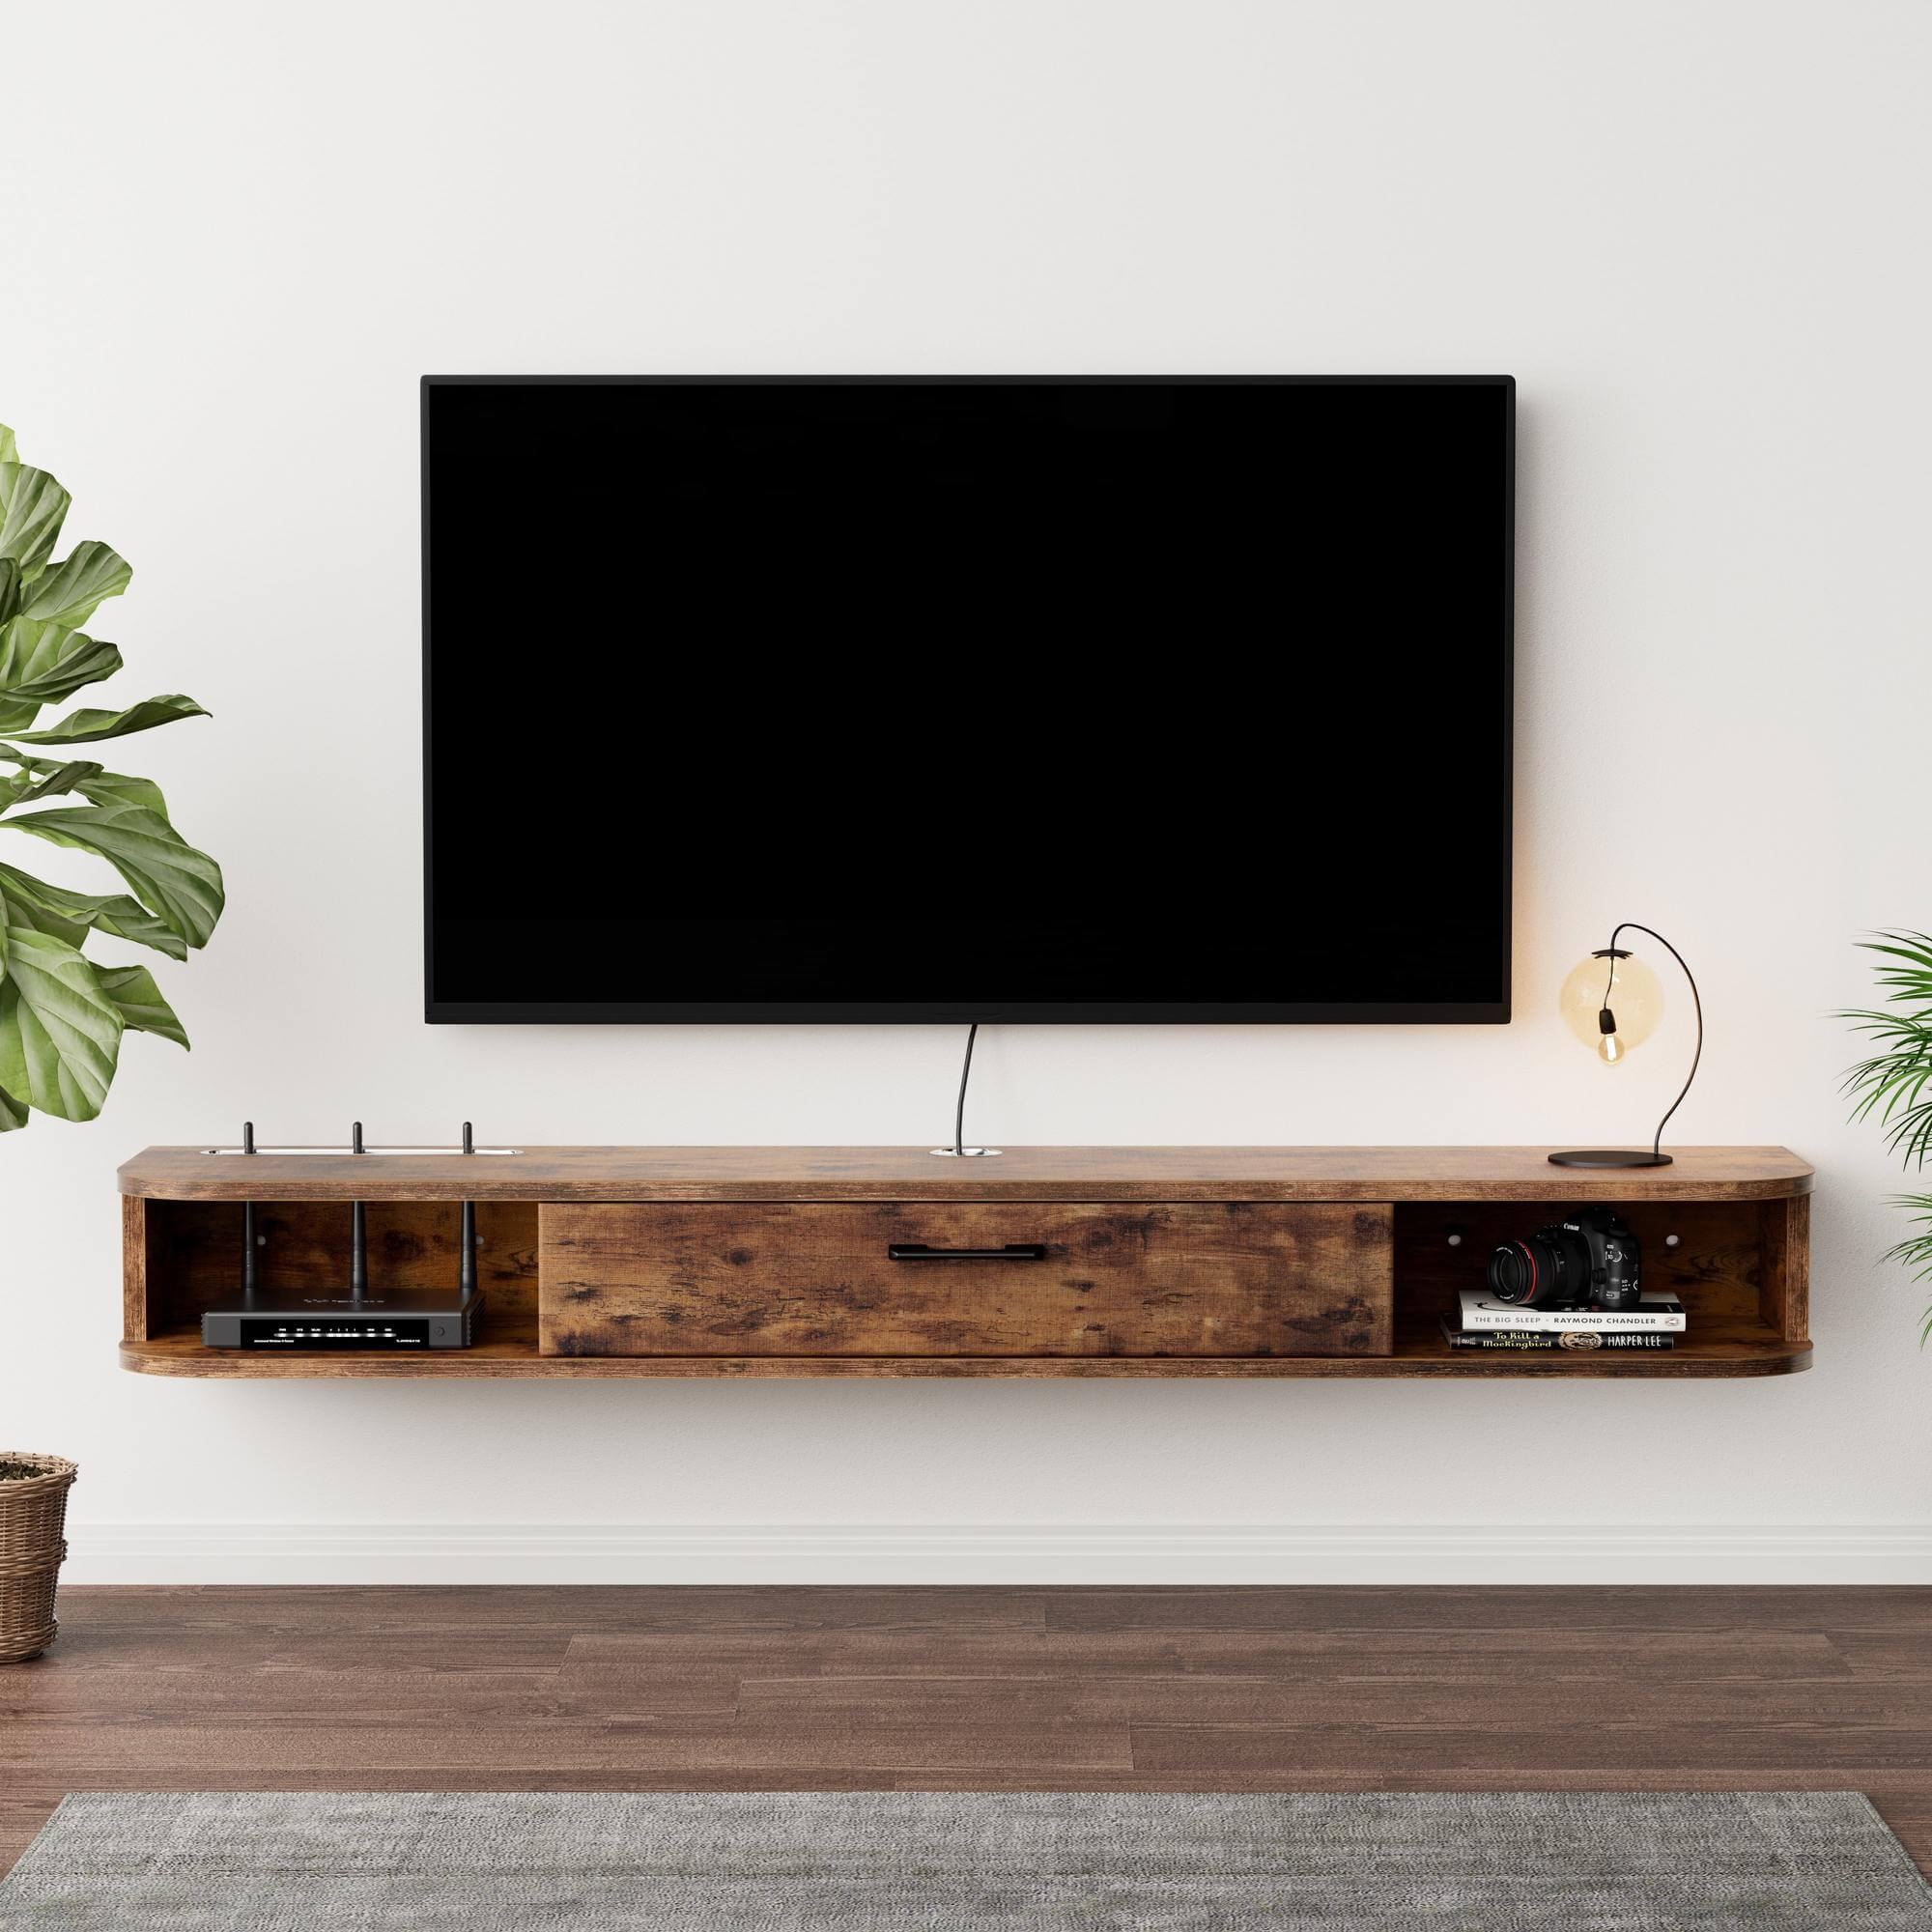 Rustic Brown Slim Floating TV Stand Wall Shelf, up to 60" TVs